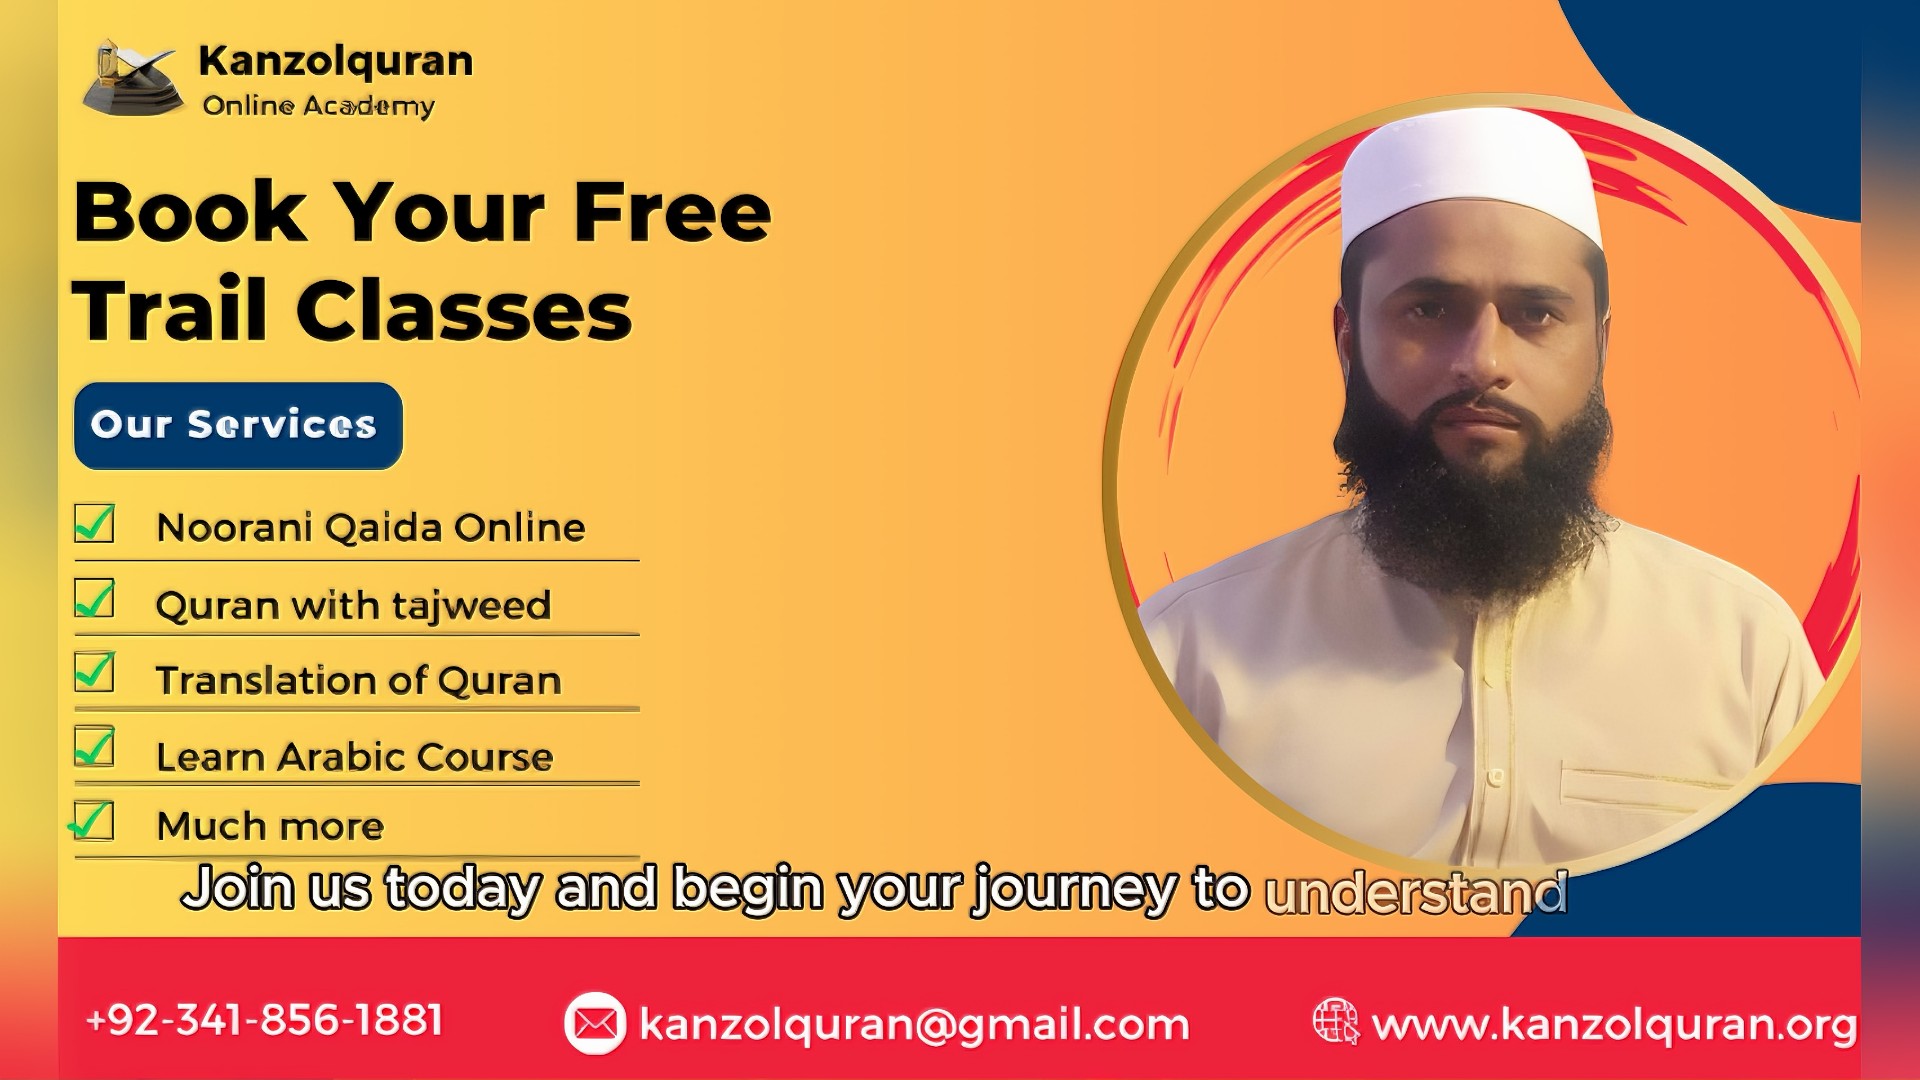 Quranic Education Made Easy: Enroll in Kanzol Quran Online Academy's Accessible Classes!